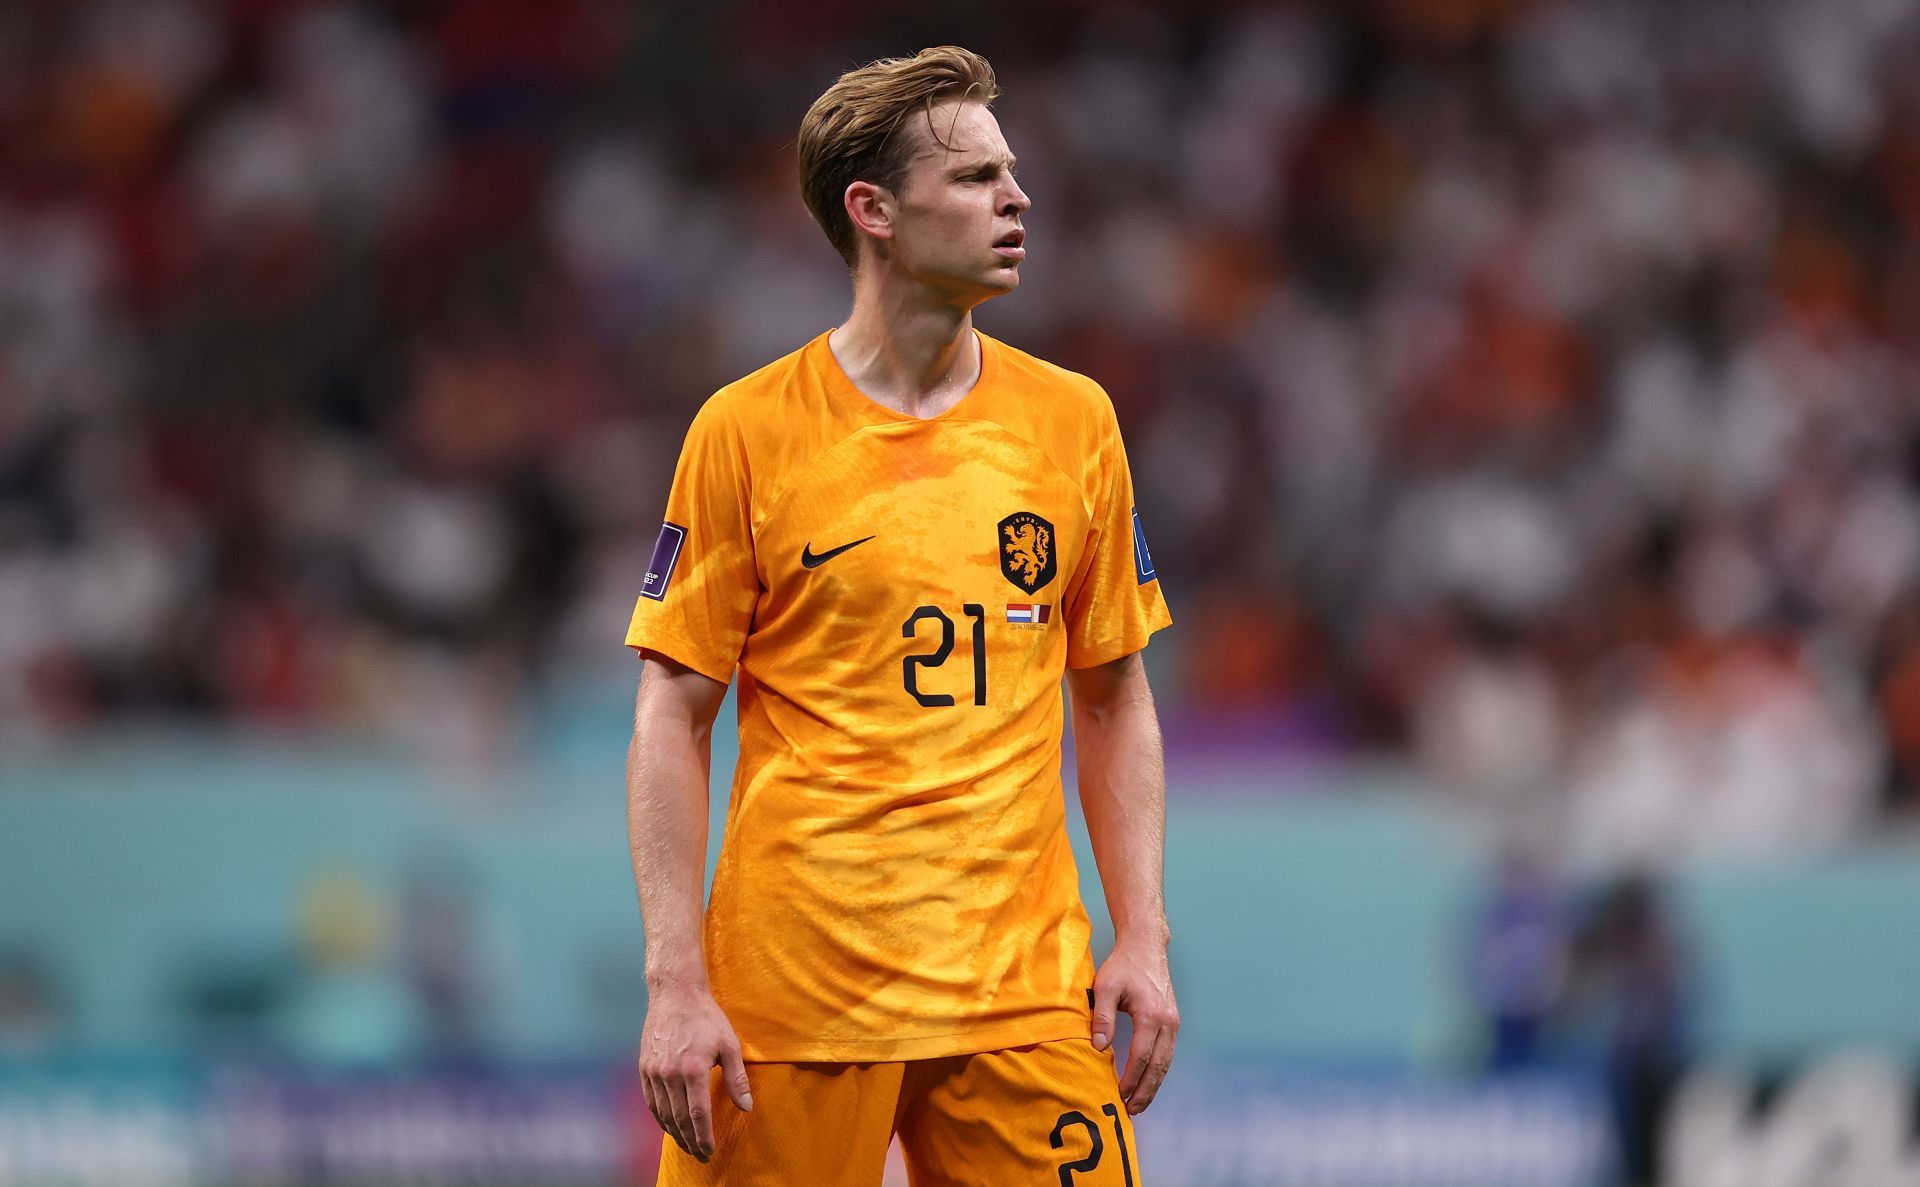 Frenkie de Jong remains linked with a move to Old Trafford.